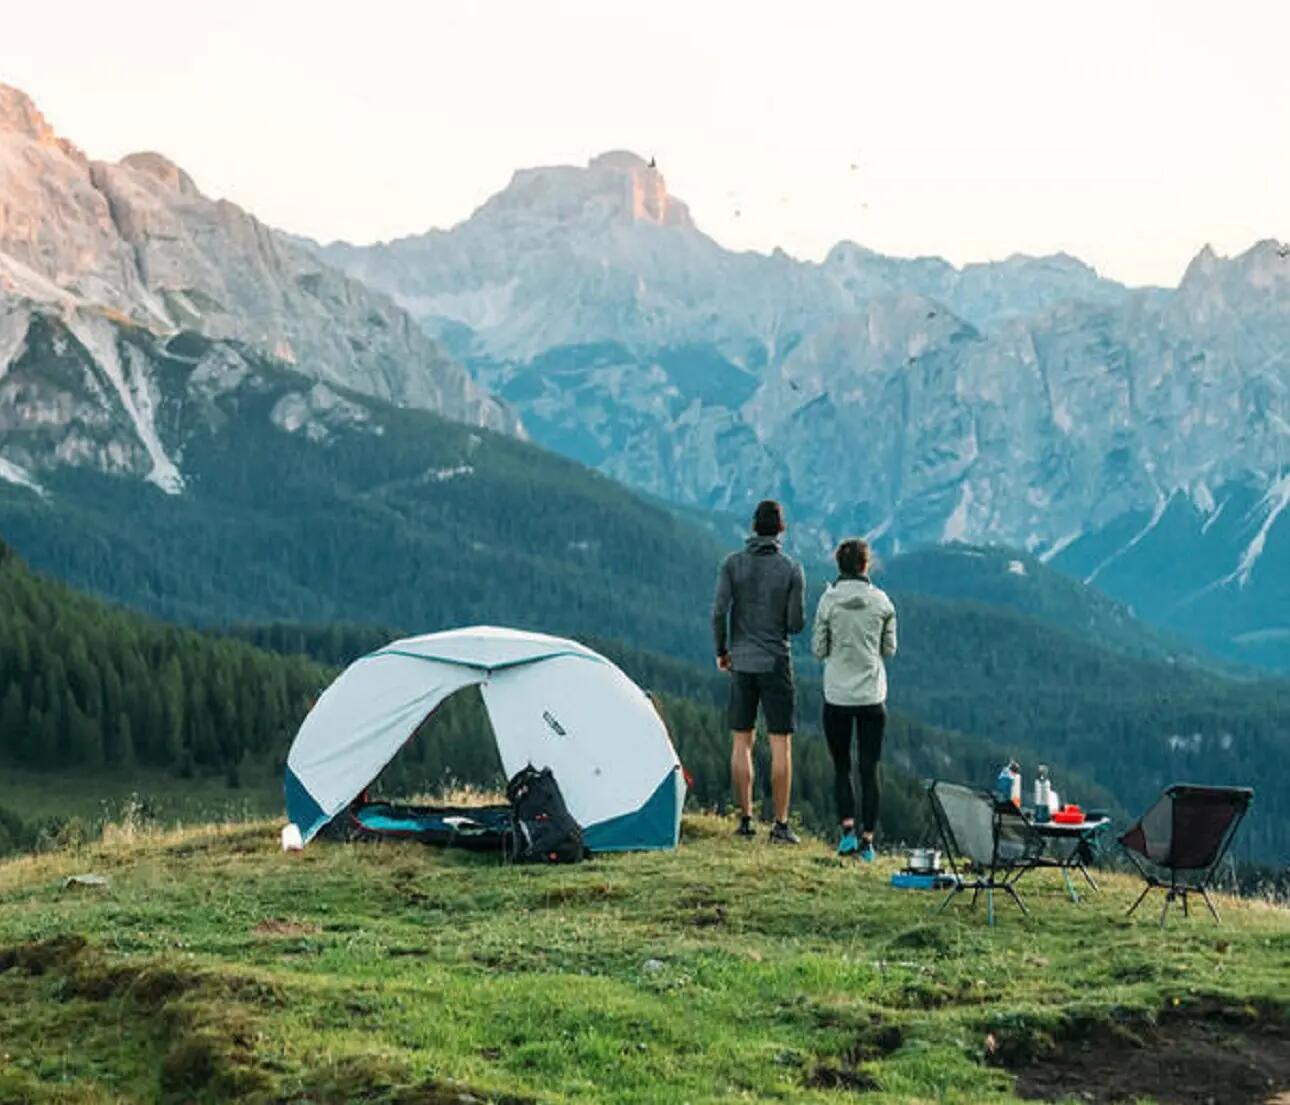 How to Choose Your Camping Tent?